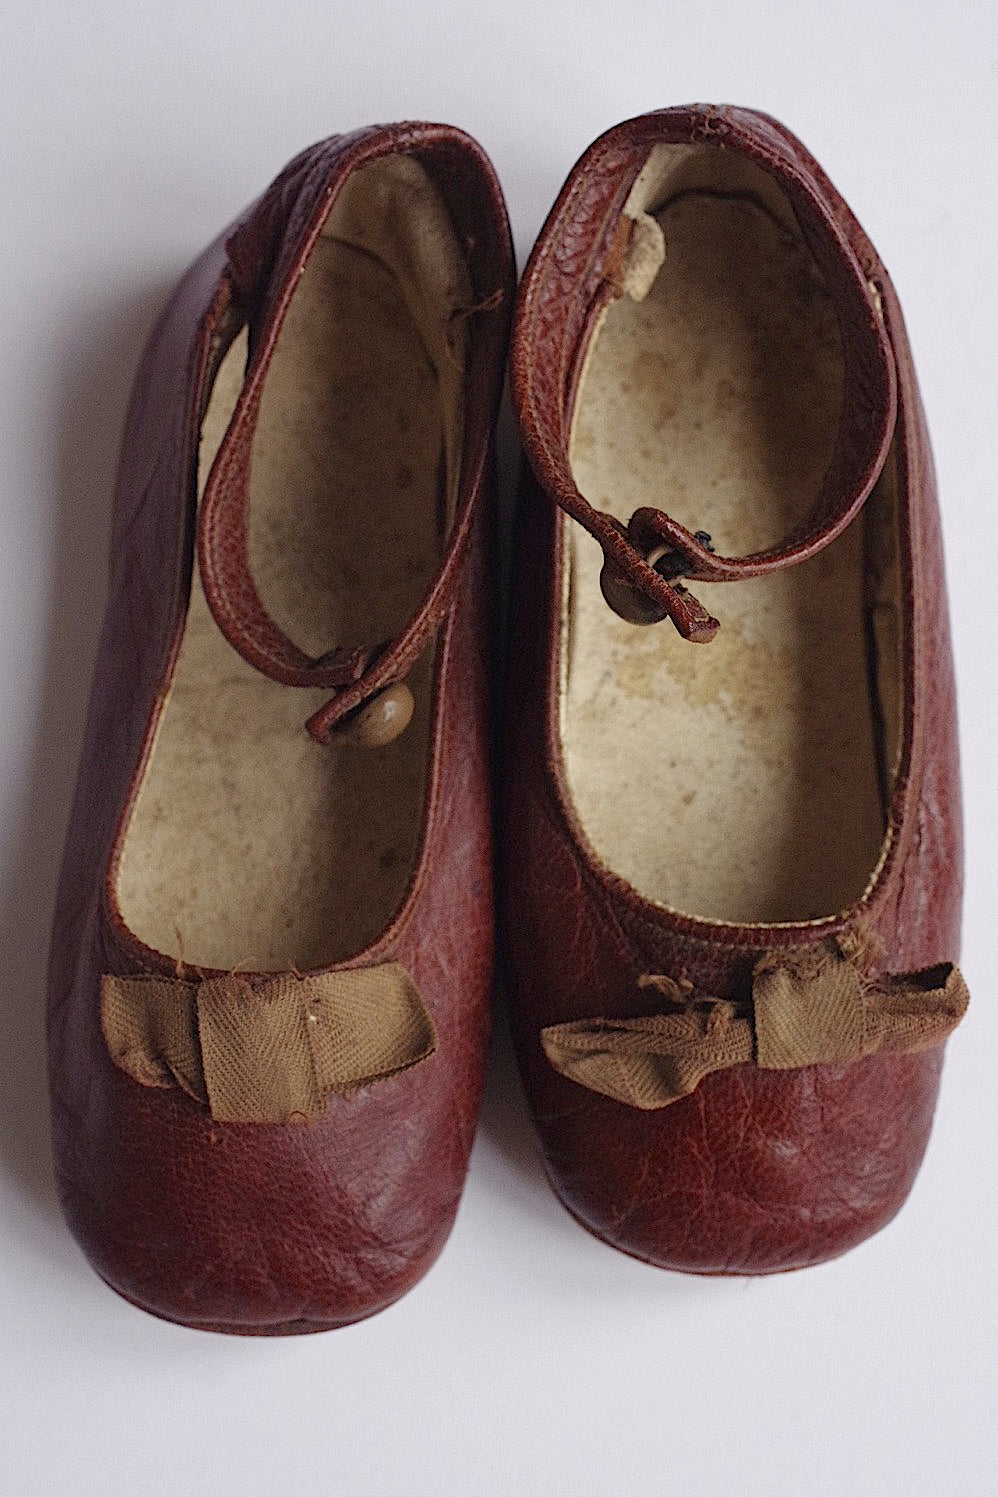 chaussures antique antique shoes for Bebe